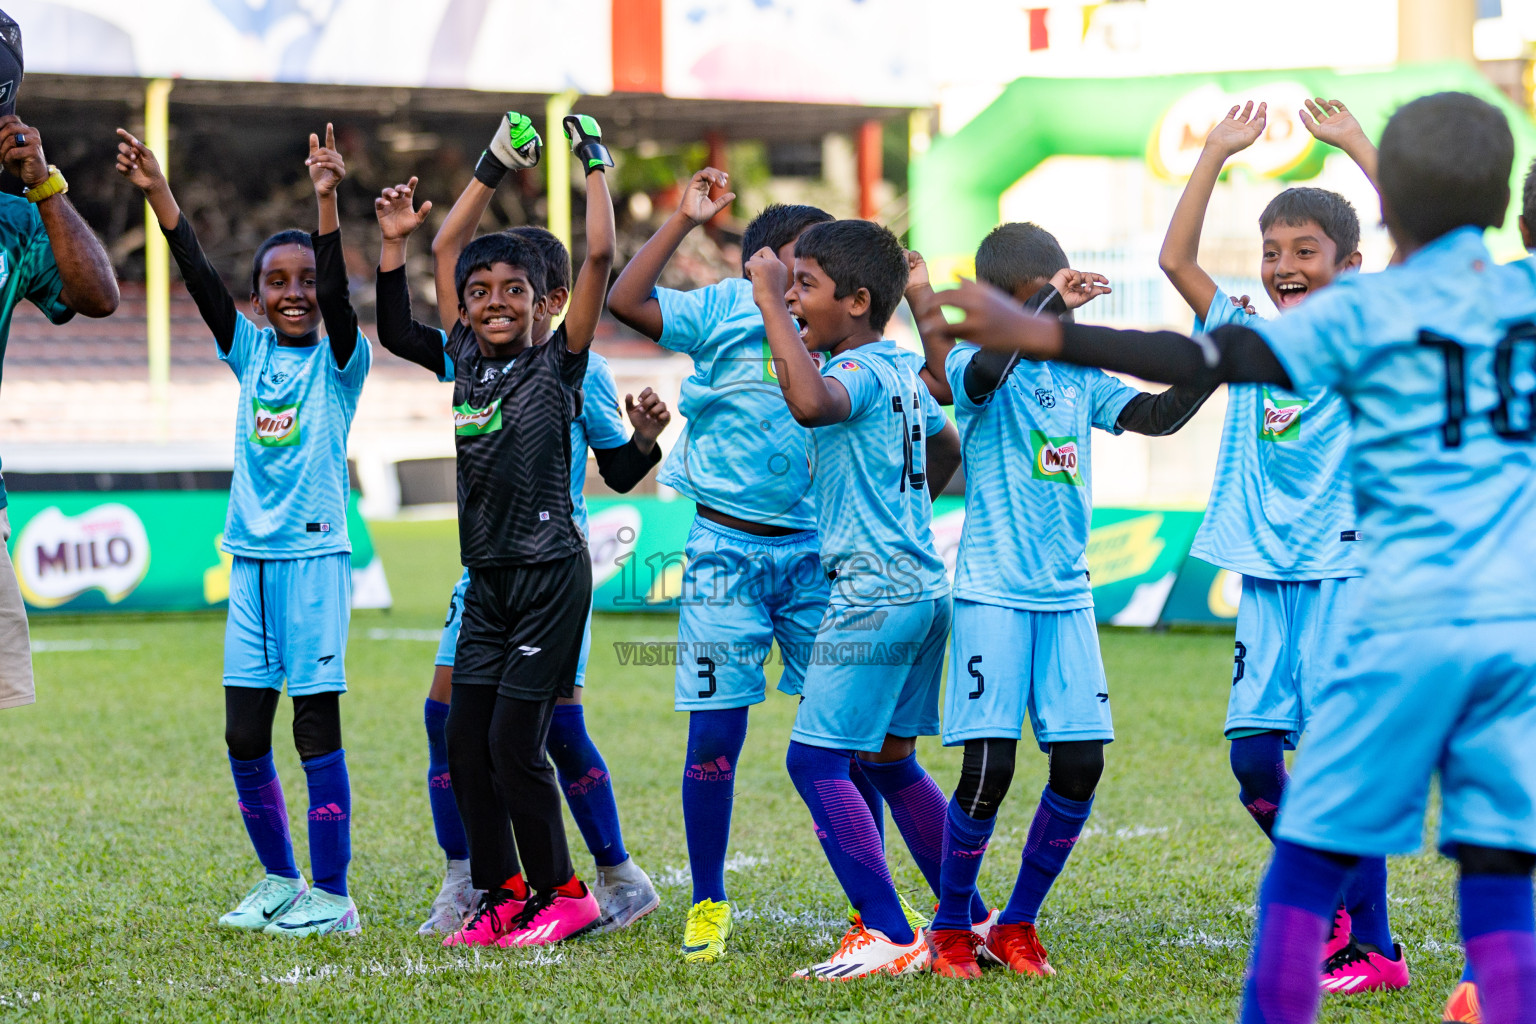 Day 2 of MILO Kids Football Fiesta was held at National Stadium in Male', Maldives on Saturday, 24th February 2024.